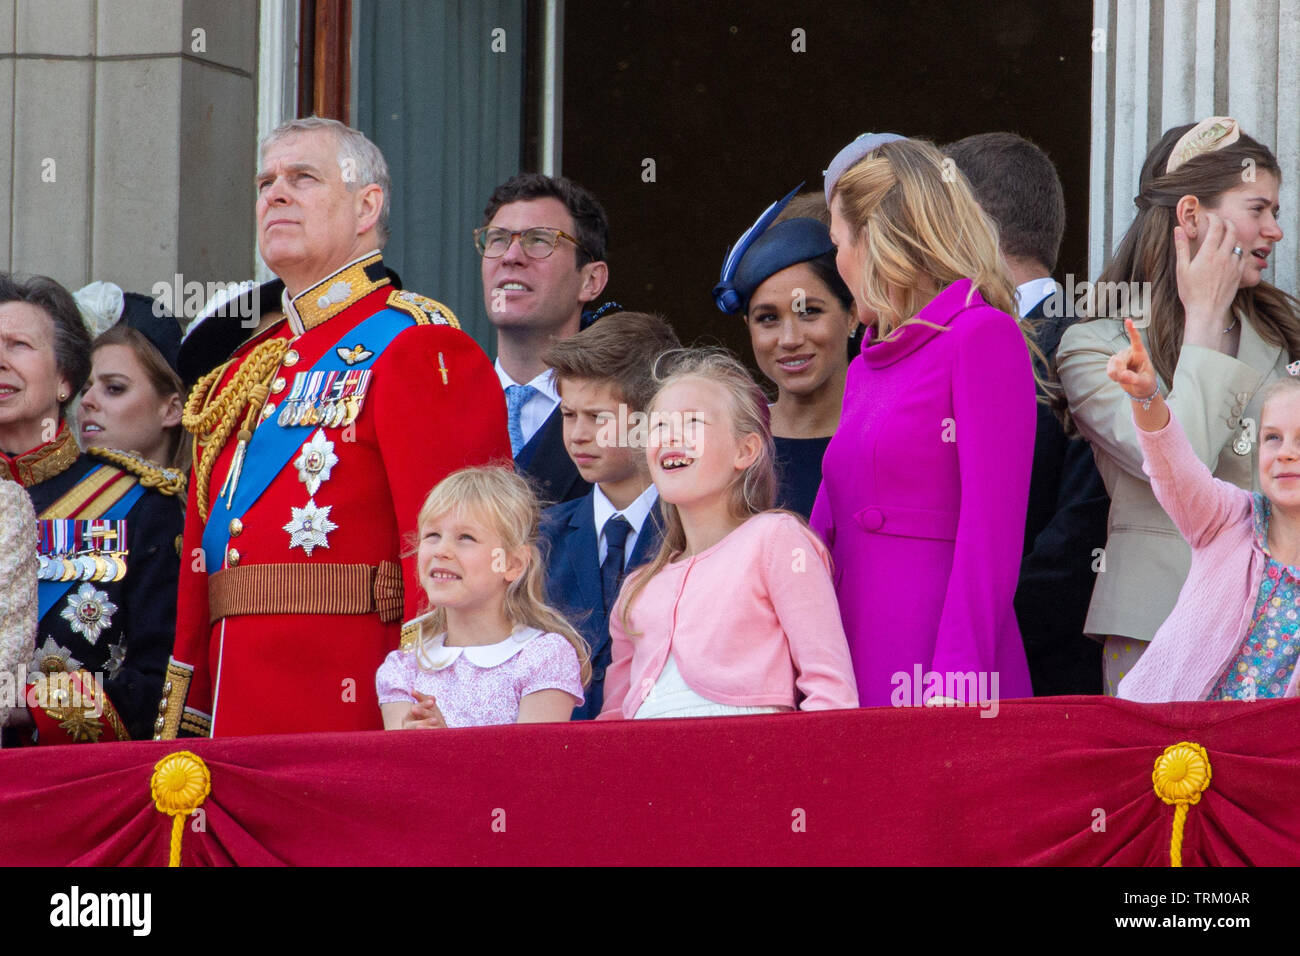 Picture dated June 8th shows The Duchess of Sussex (centre, blue hat)  at the Trooping the Colour in London today.   The Queen's official birthday has been marked with the annual Trooping the Colour parade. She was joined by members of her family and thousands of spectators to watch the display in Horse Guards Parade in Whitehall. The Prince of Wales, the Duchess of Cornwall, the Duke and Duchess of Cambridge and the Duke and Duchess of Sussex all attended. The Queen celebrated her 93rd birthday in April. The royal colonels - the Prince of Wales, colonel of the Welsh Guards, the Princess Royal Stock Photo